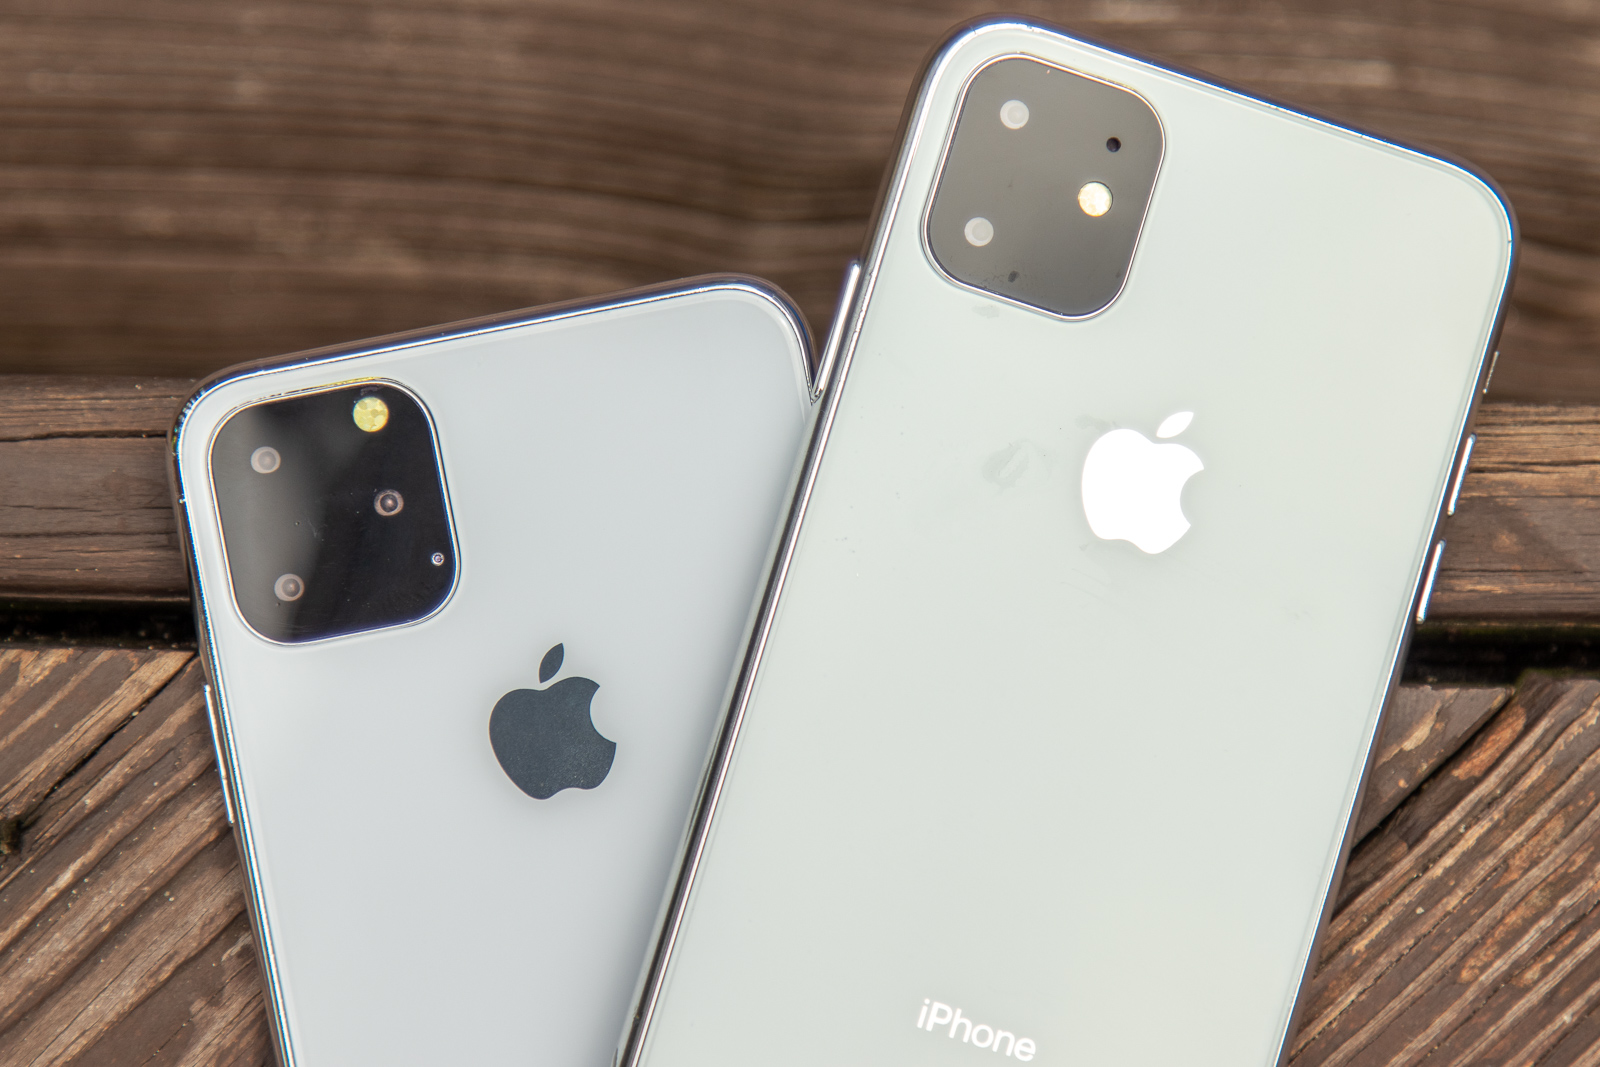 The camera bump is about to get bumpier in the iPhone XI.